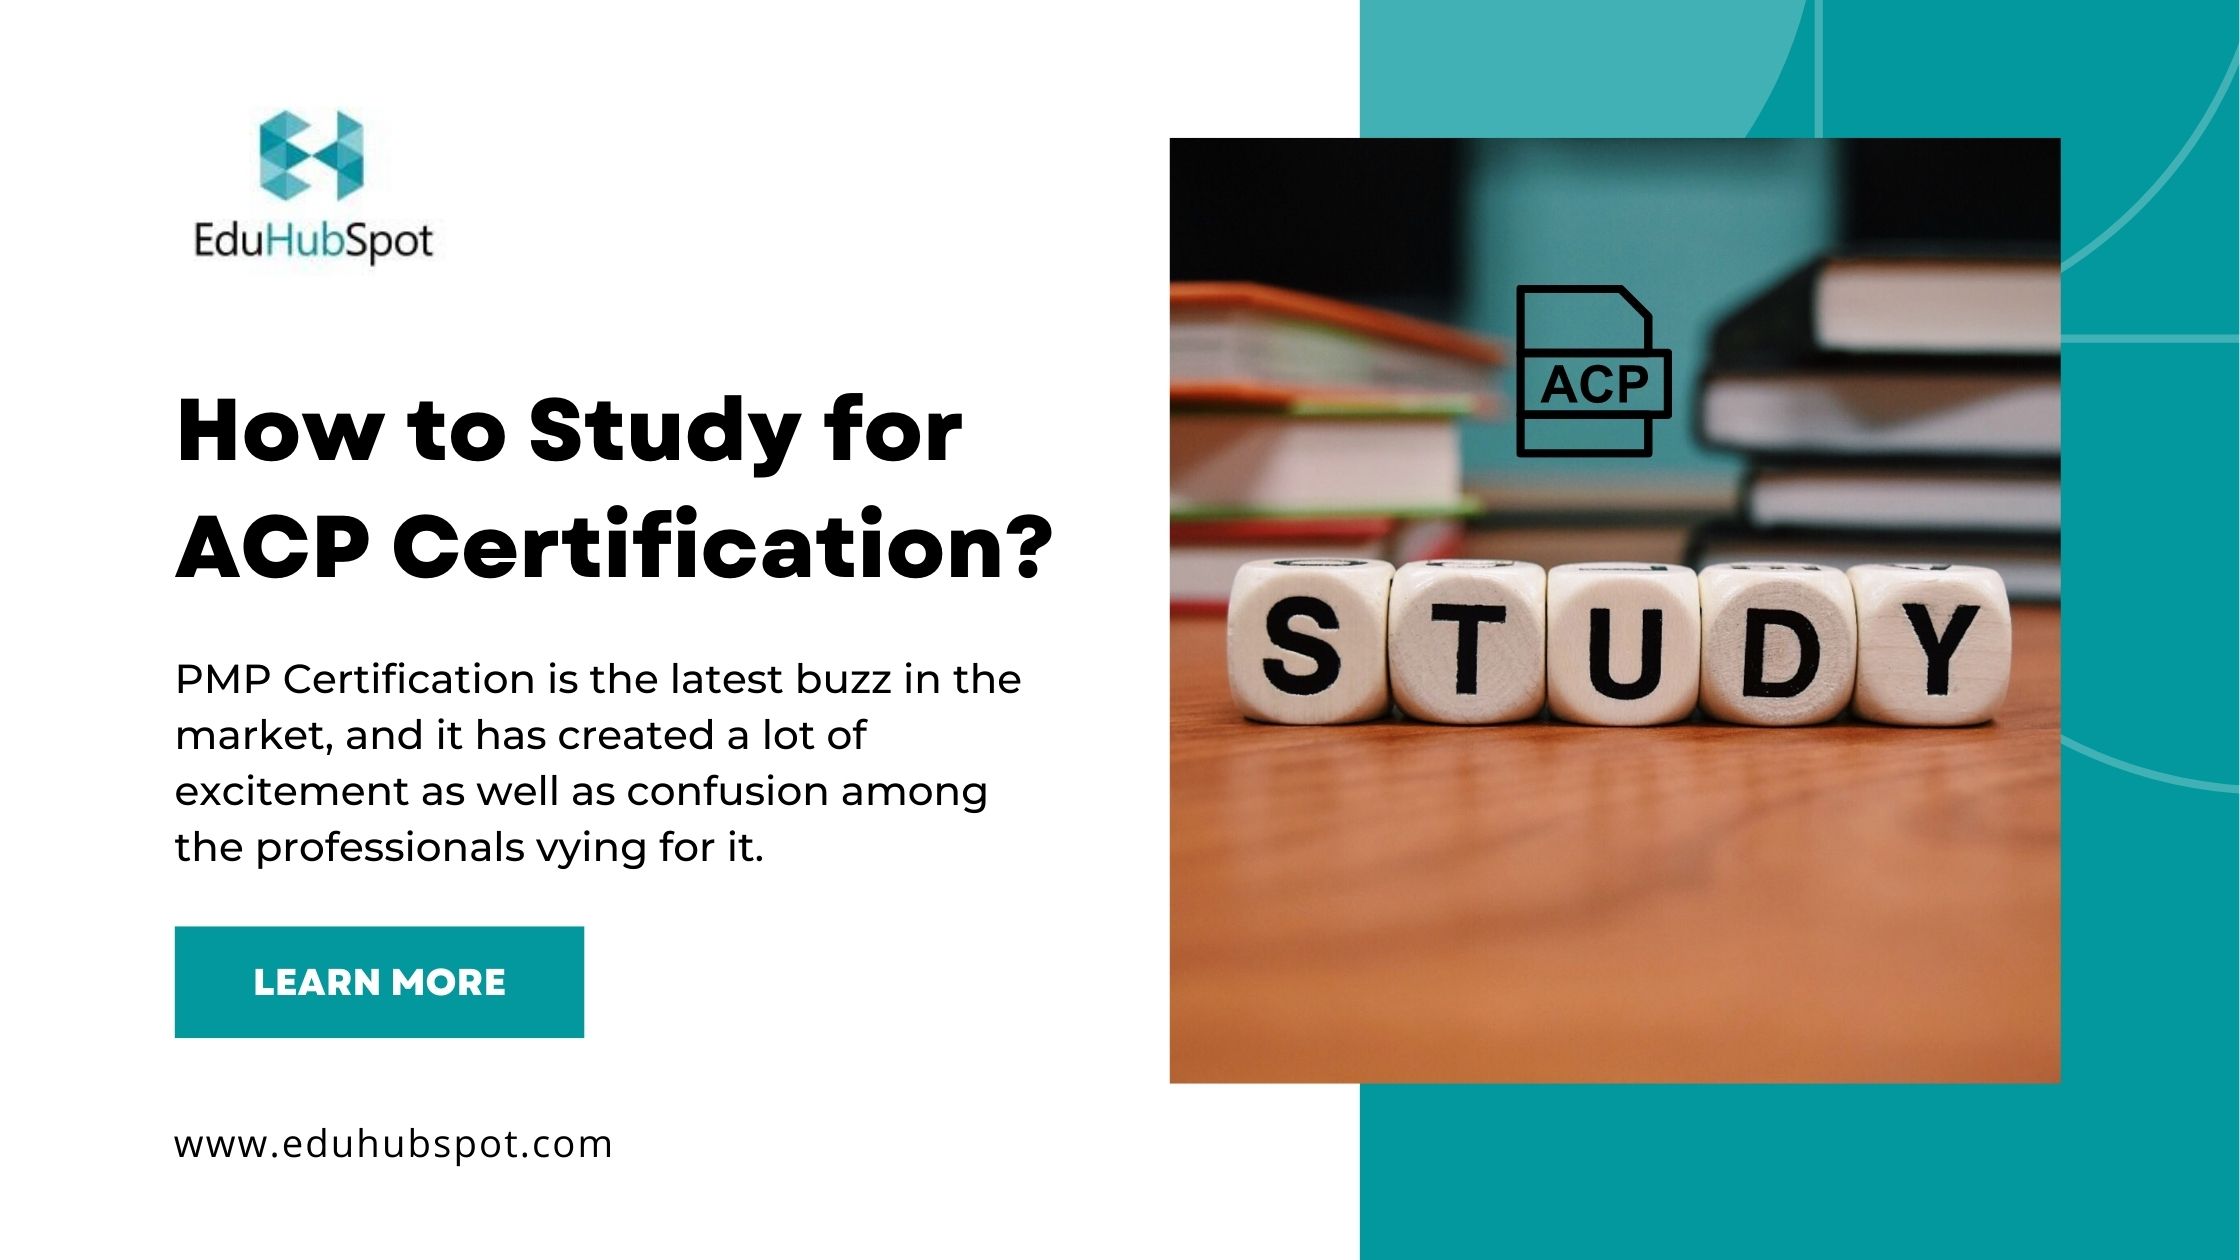 How to Study for ACP Certification? Share Your Ideas